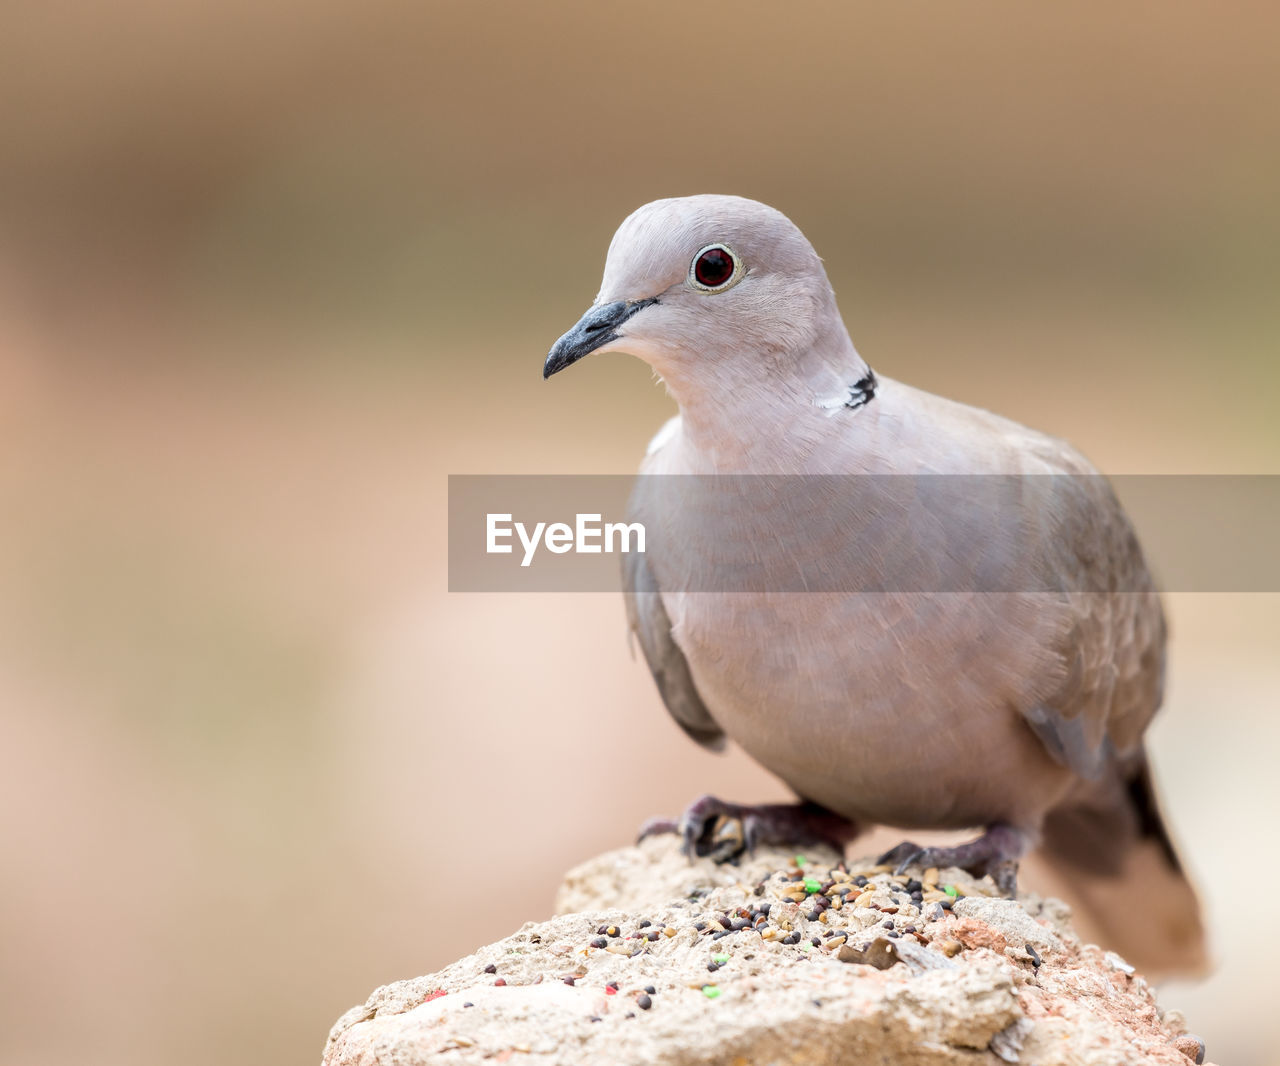 CLOSE-UP OF BIRD PERCHING ON ROCK AGAINST BLURRED BACKGROUND